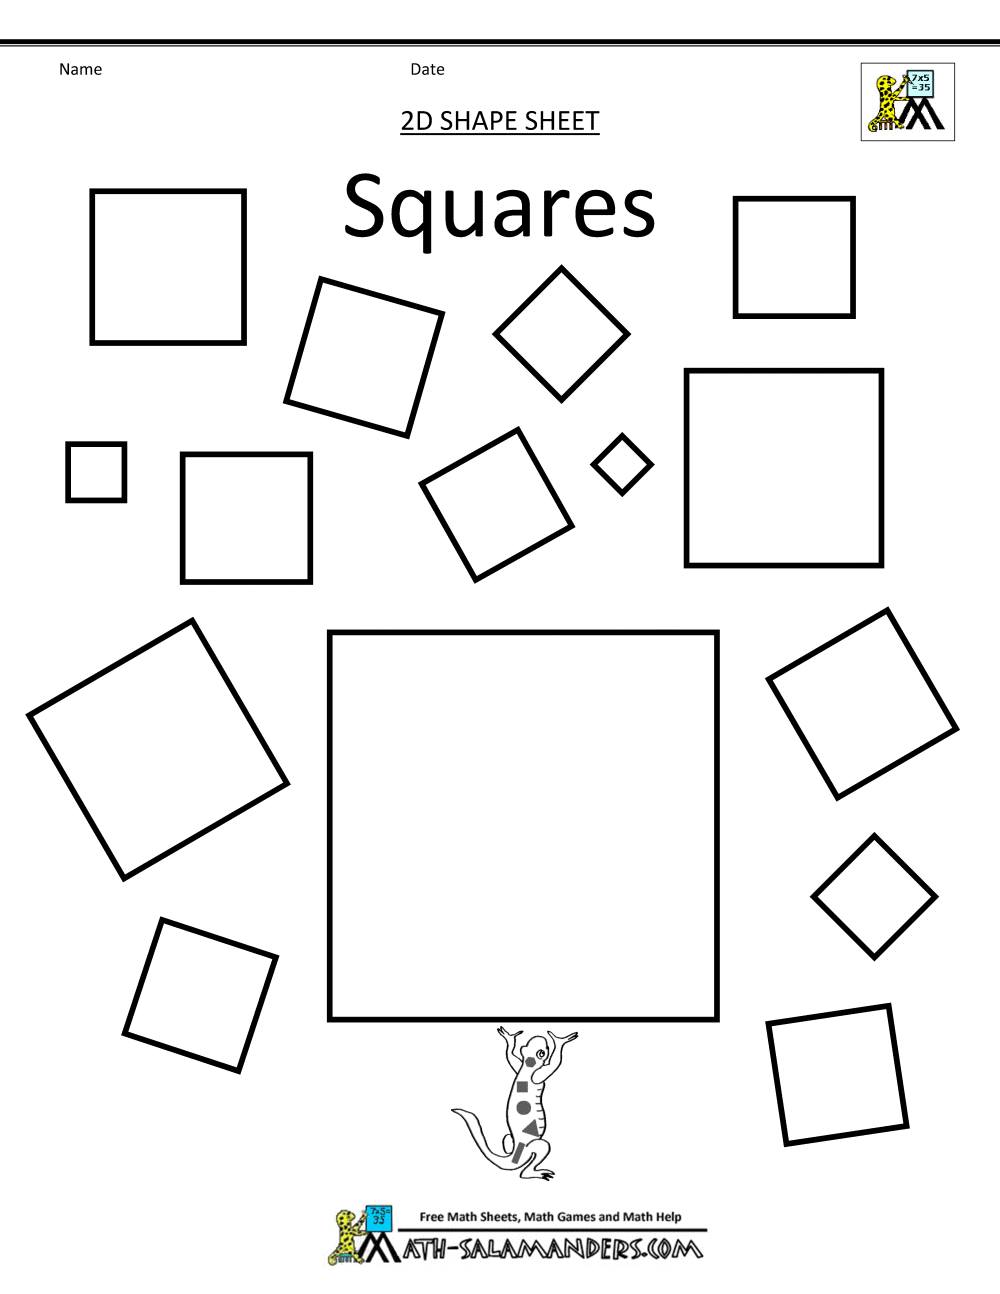 28 Images Of Different Square Shapes Template